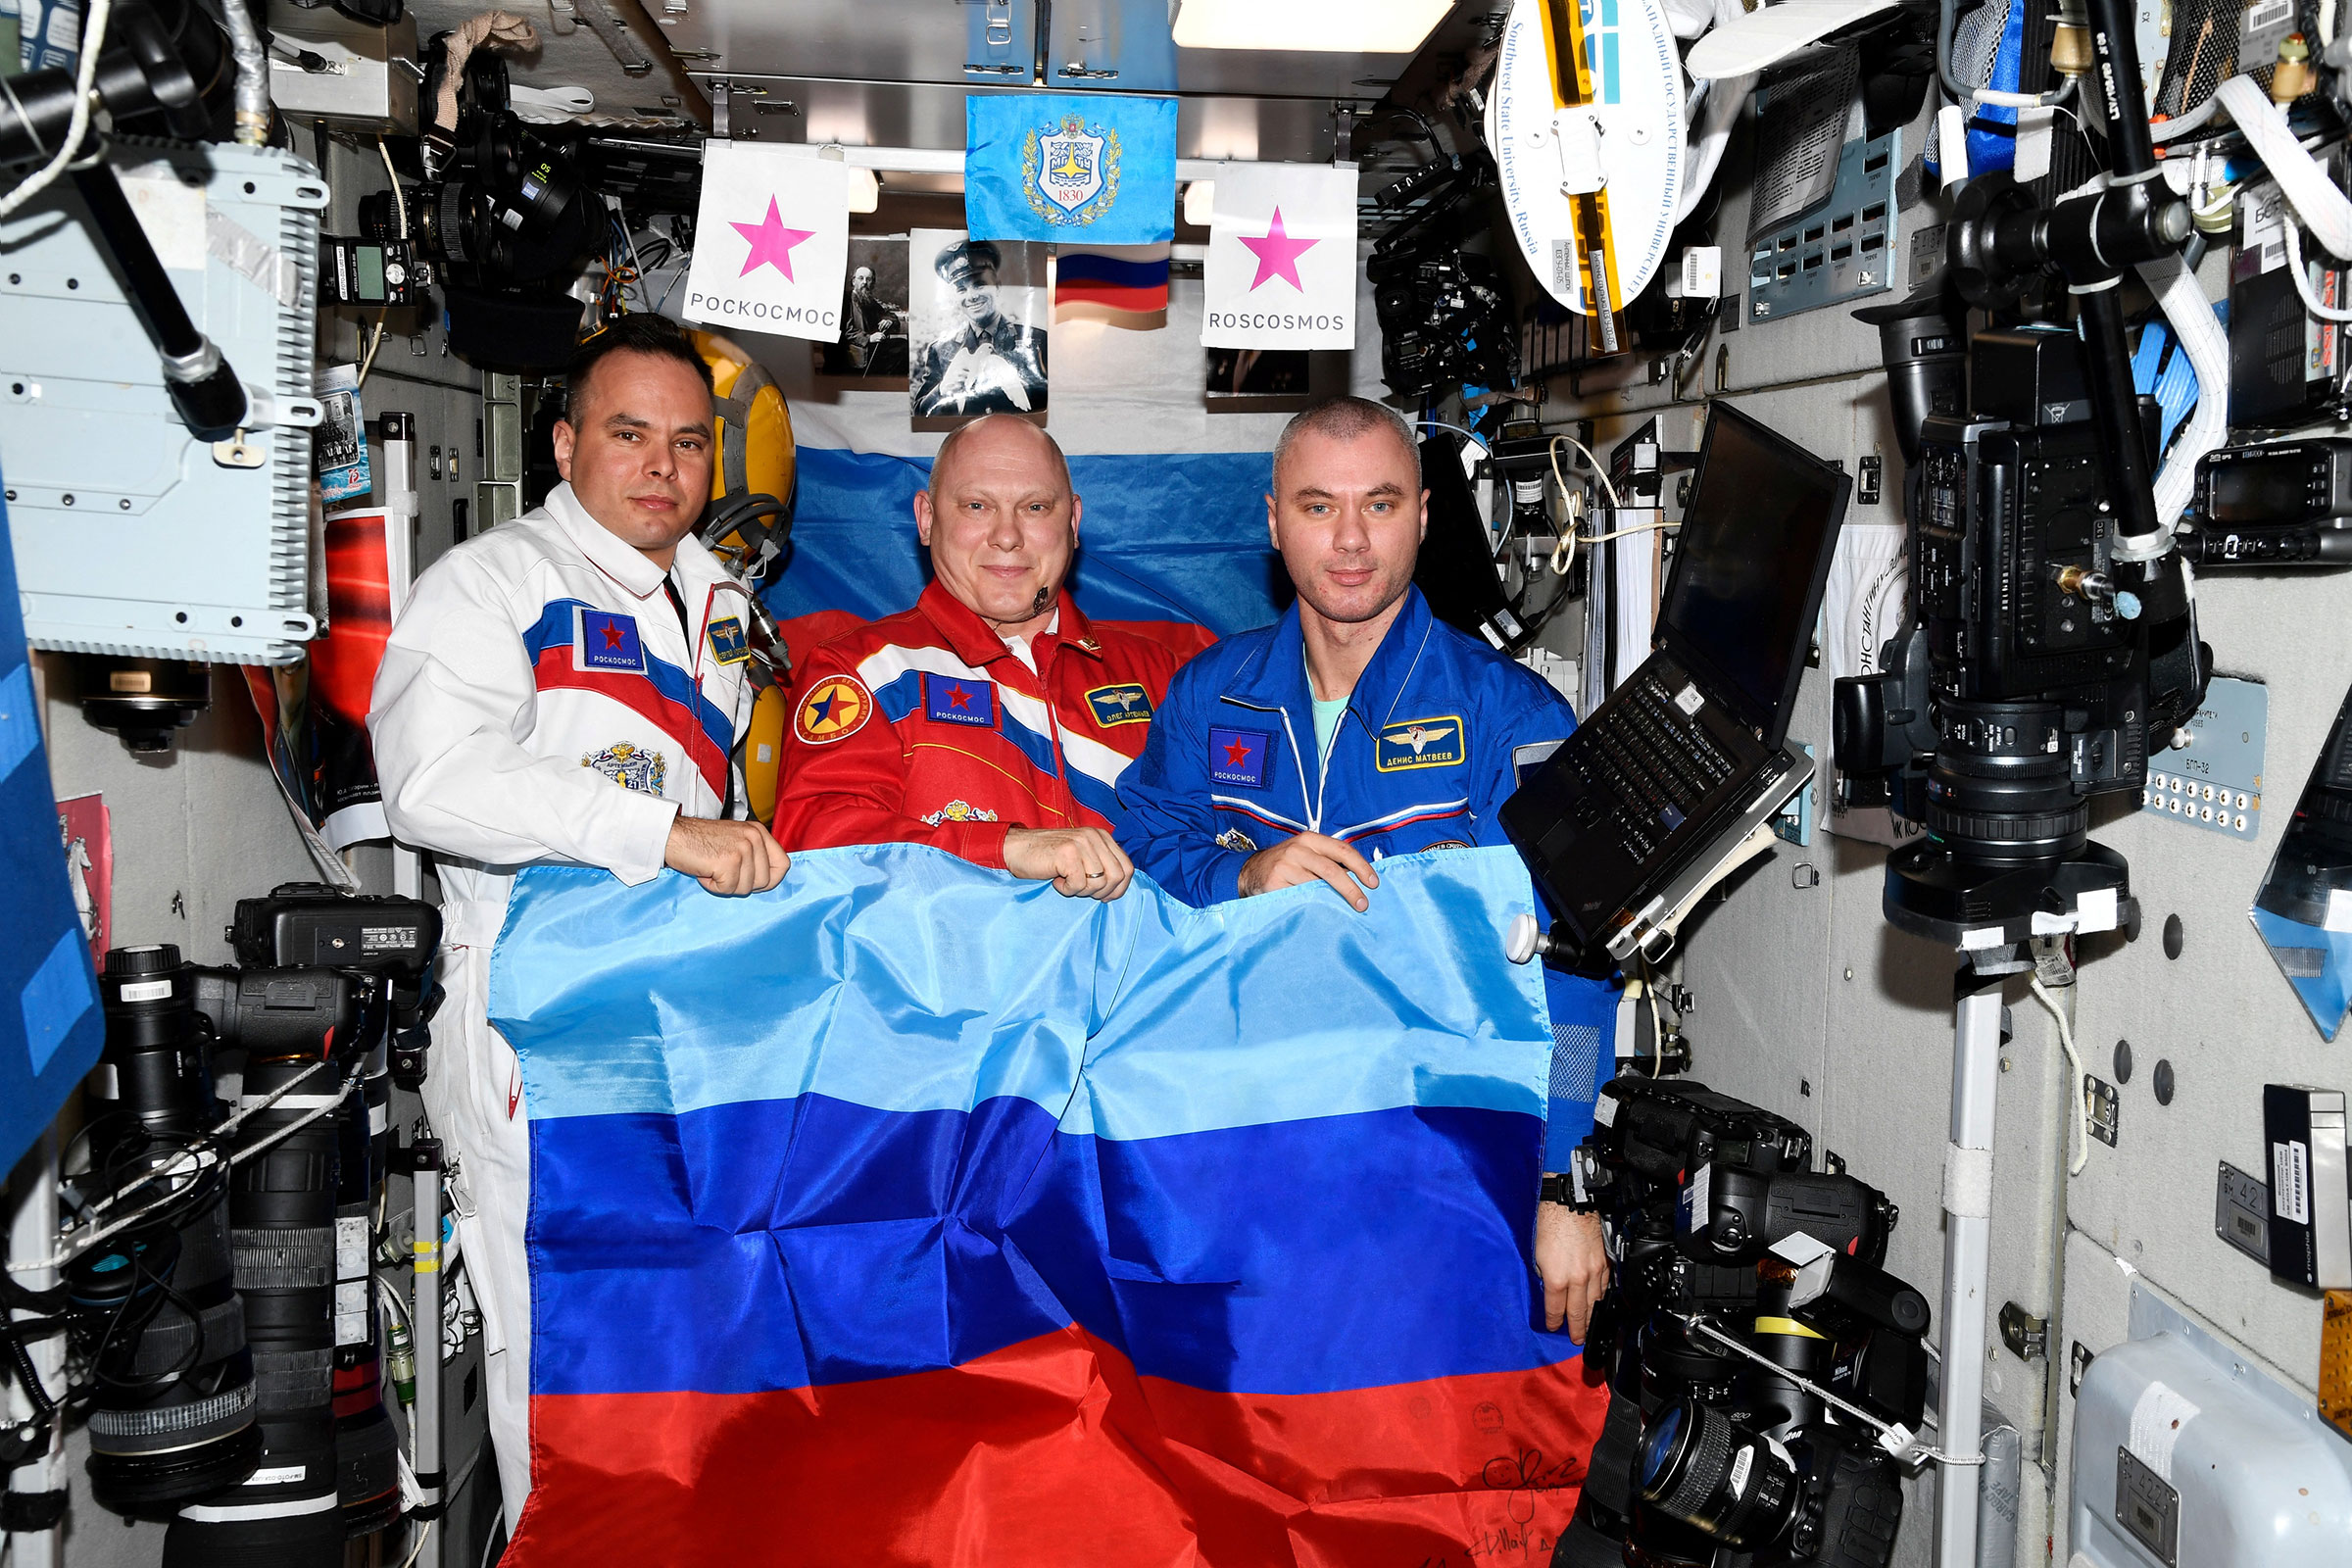 Russian cosmonauts pose with a flag of the self-proclaimed Luhansk People's Republic aboard the International Space Station (Roscosmos/Handout/Reuters)